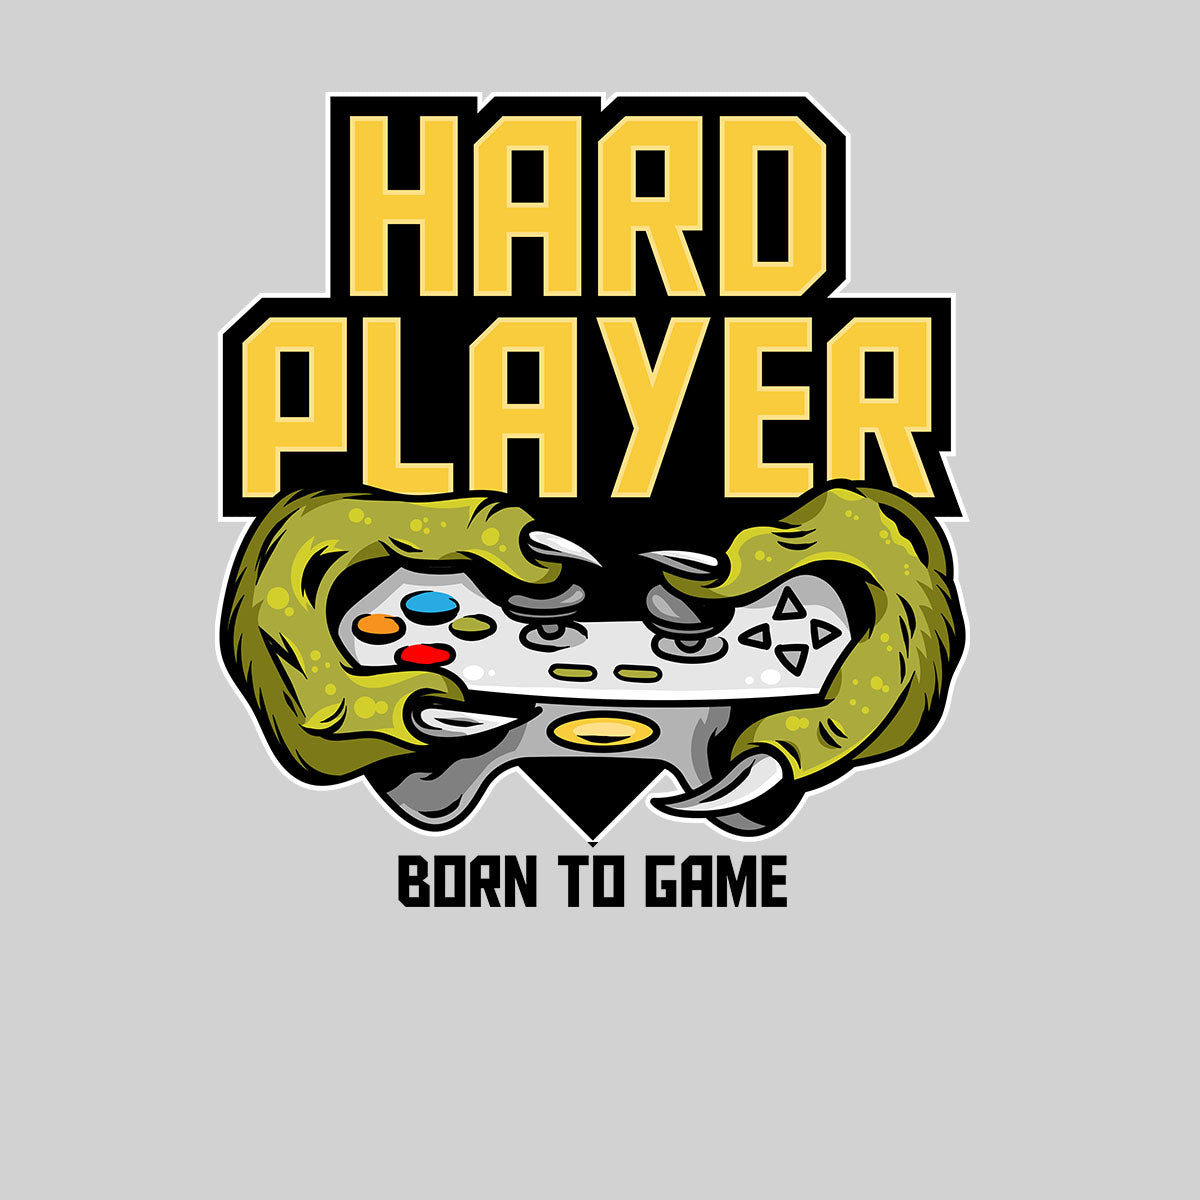 Retro Game 80's Collection Four Hard Player Typography T-shirt for Kids - Kuzi Tees